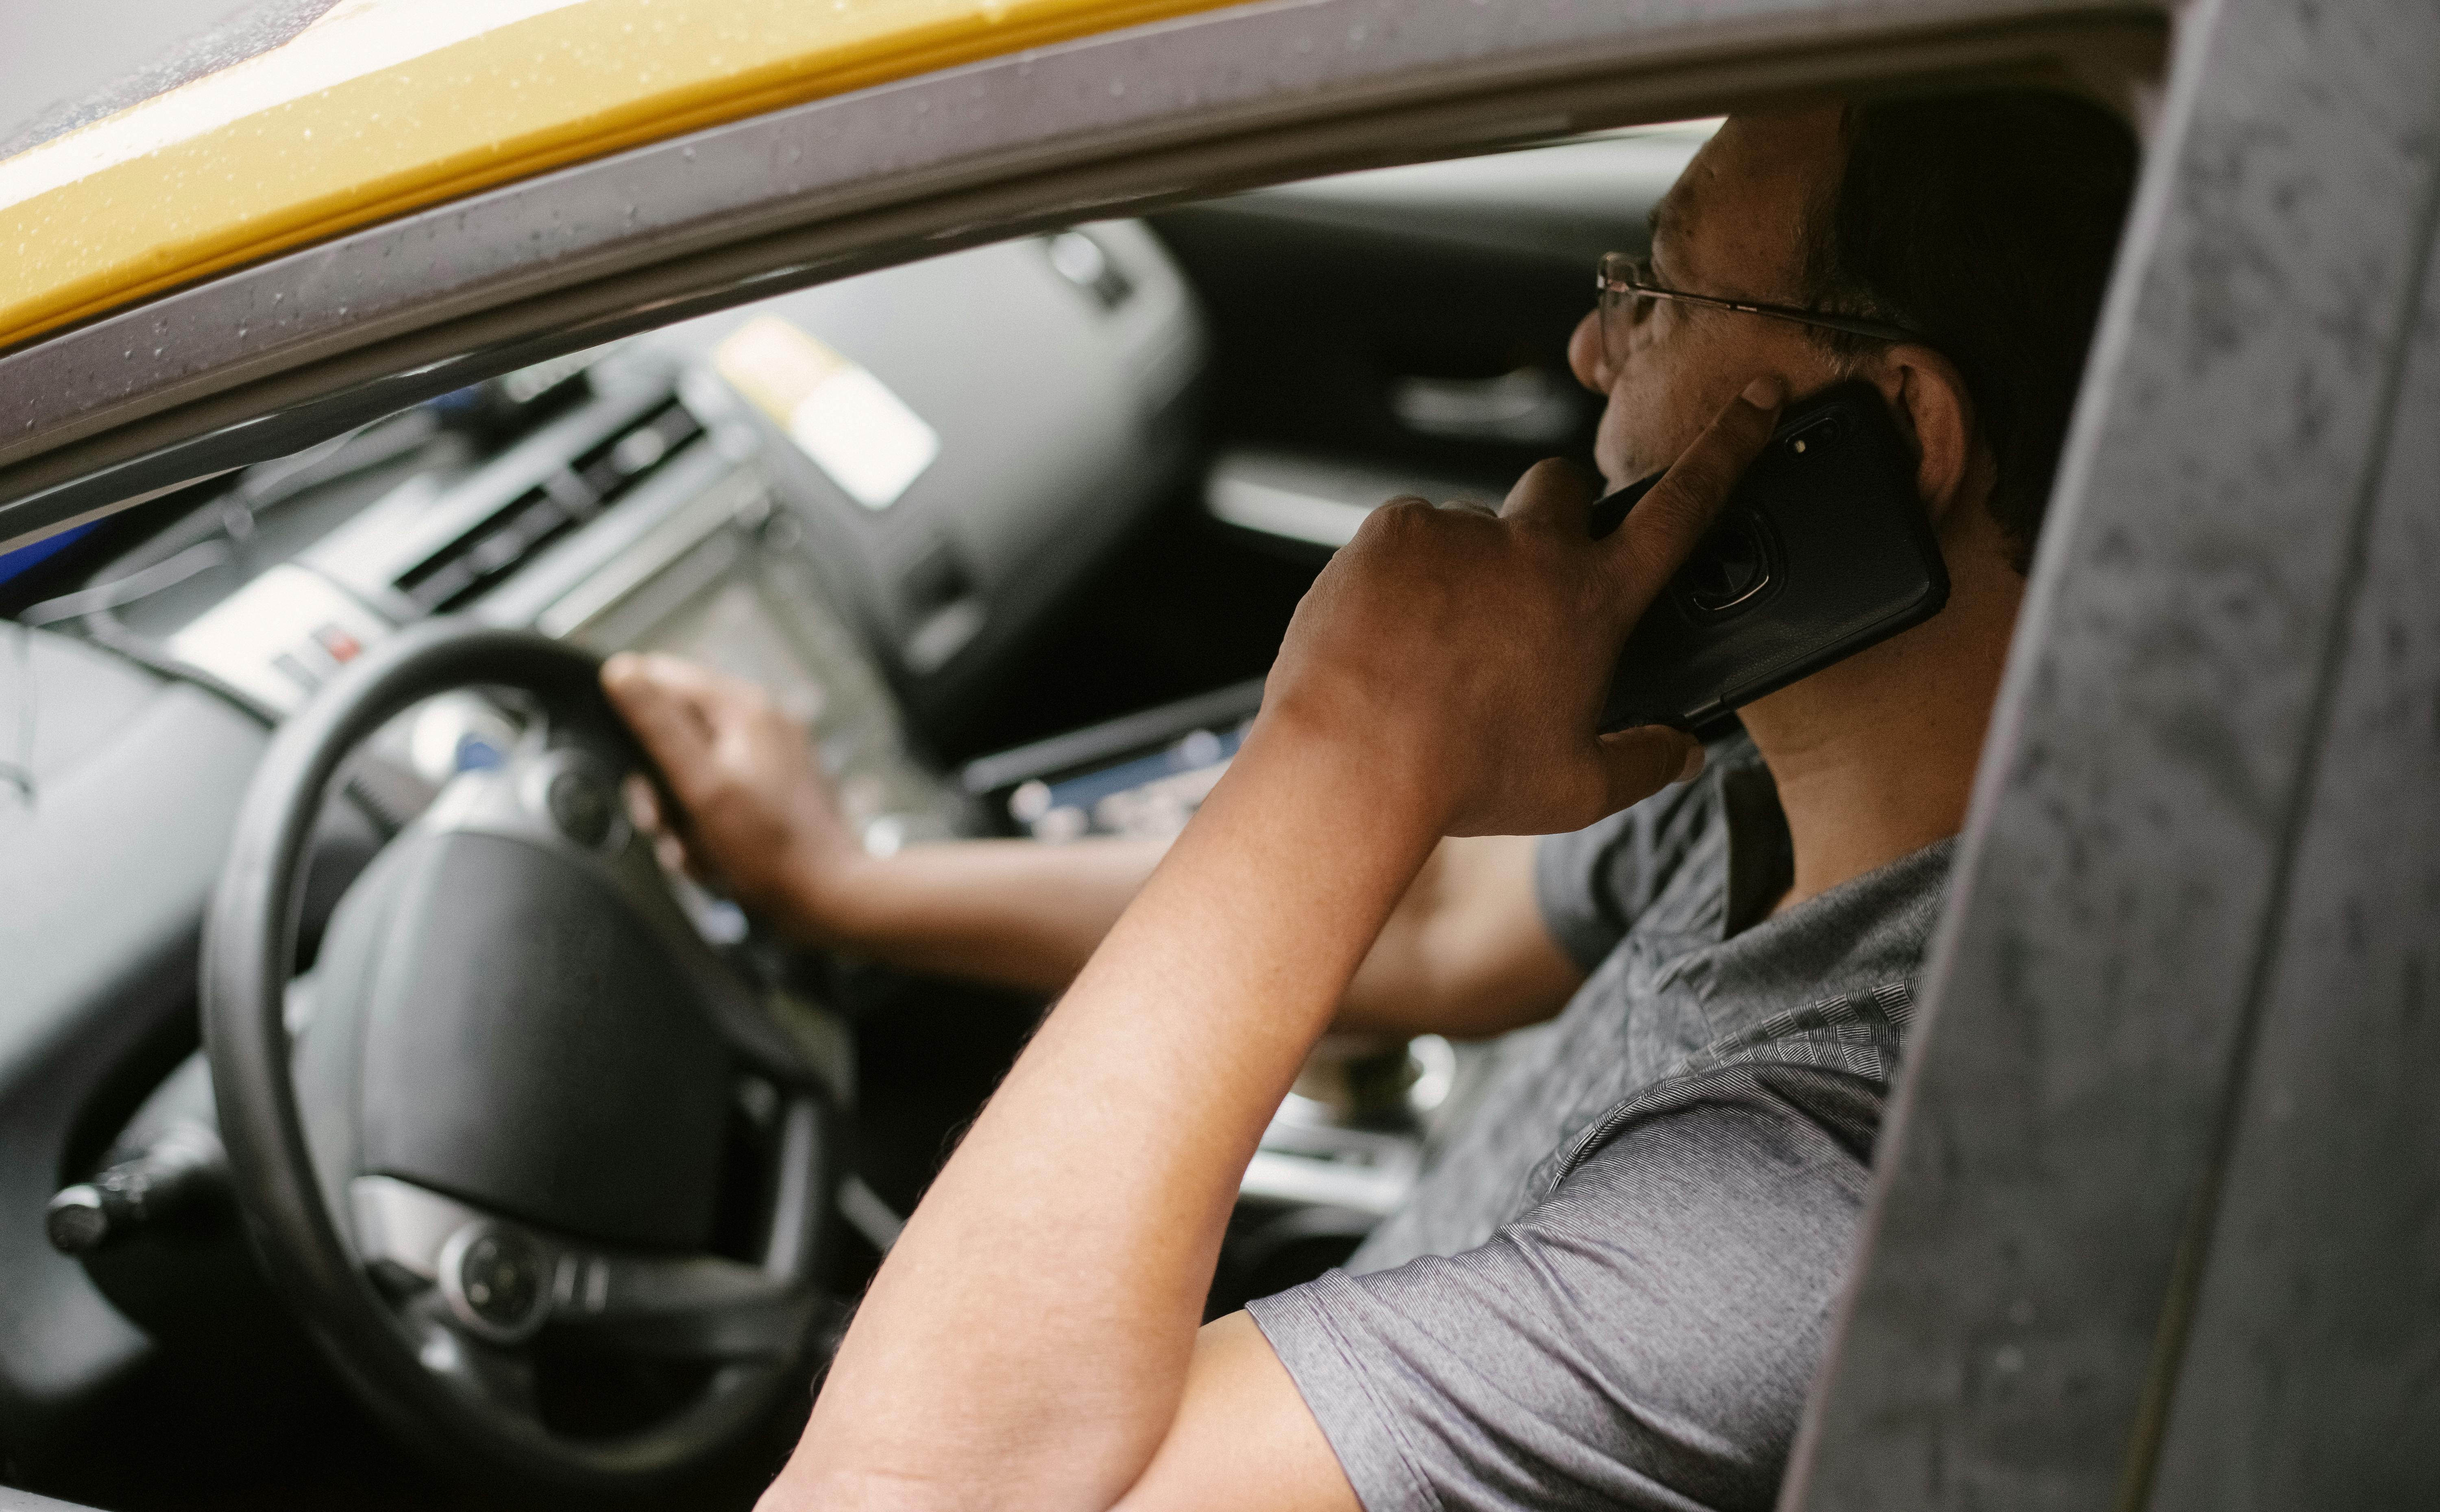 Man using a phone while driving | Source: Pexels